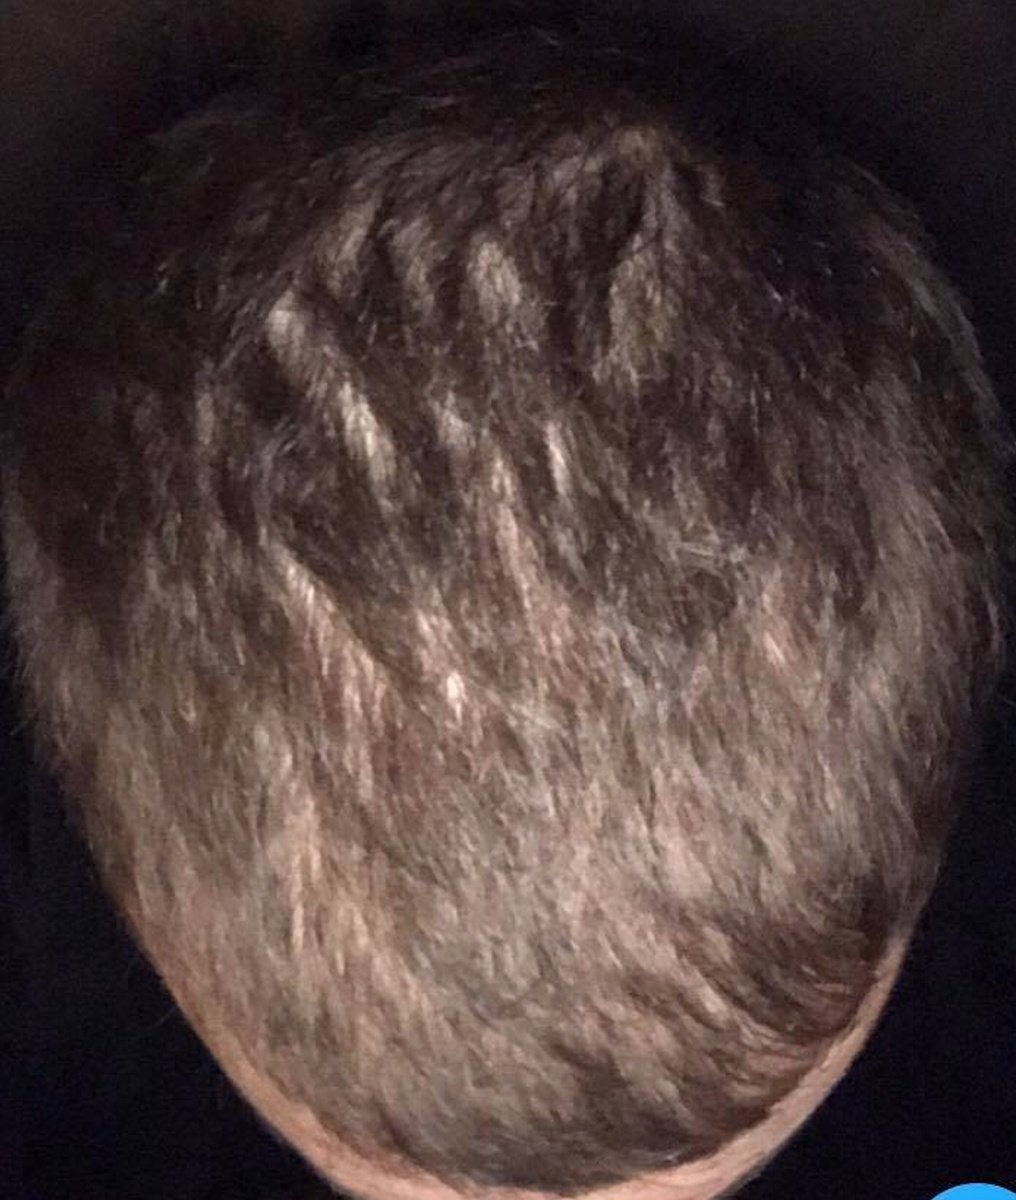 What kind of hair loss do I have (PIC INCLUDED) : tressless